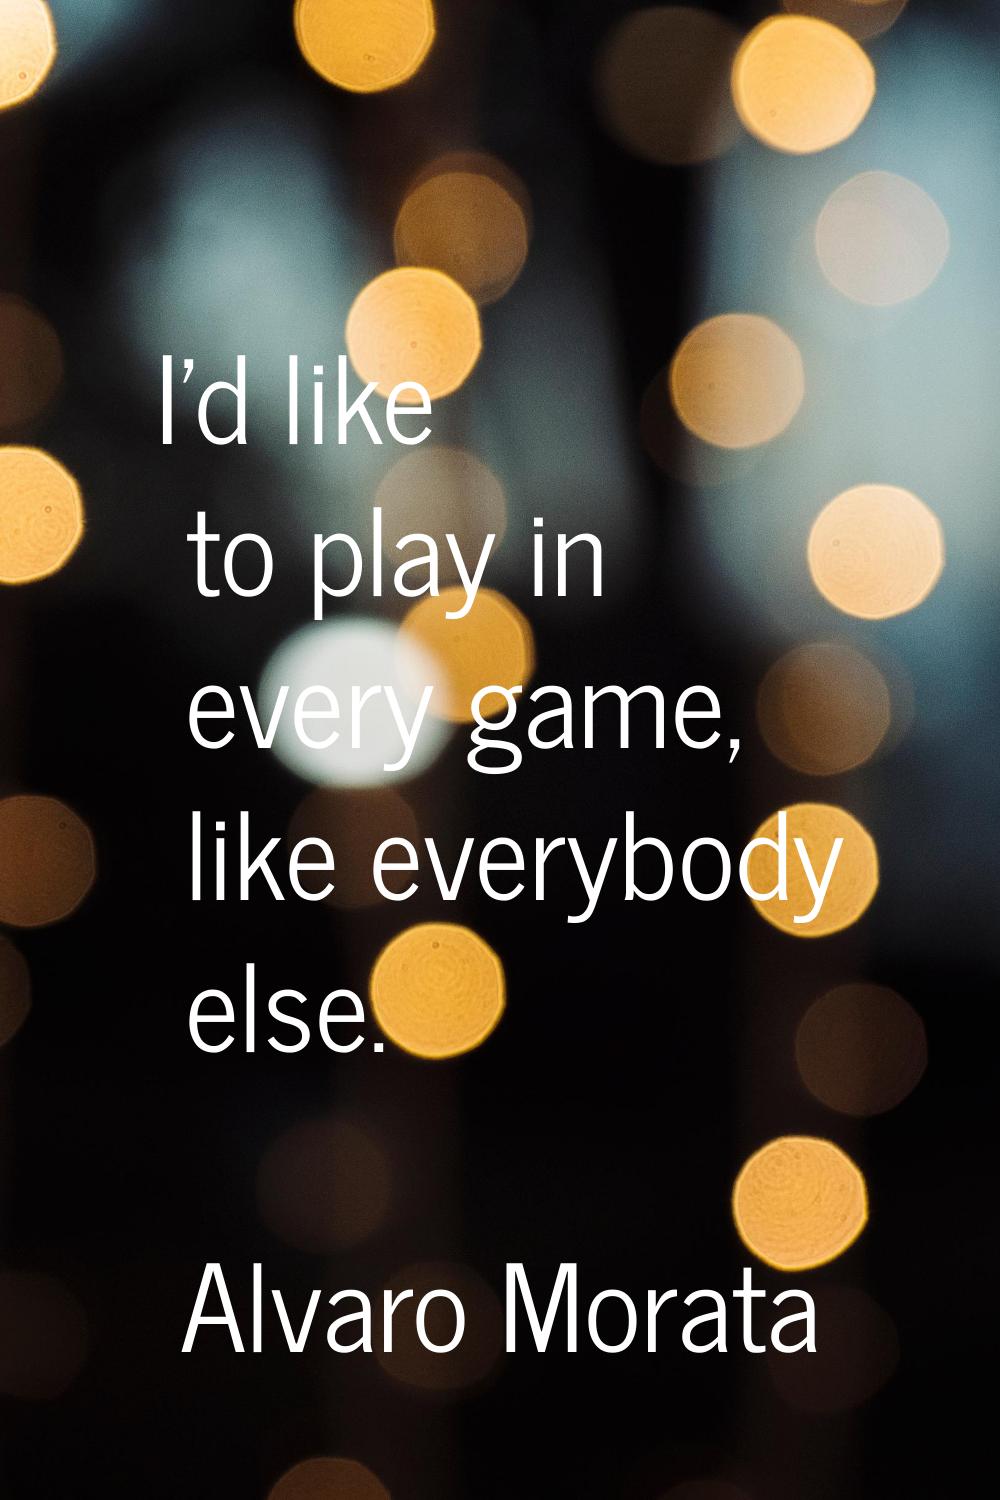 I'd like to play in every game, like everybody else.